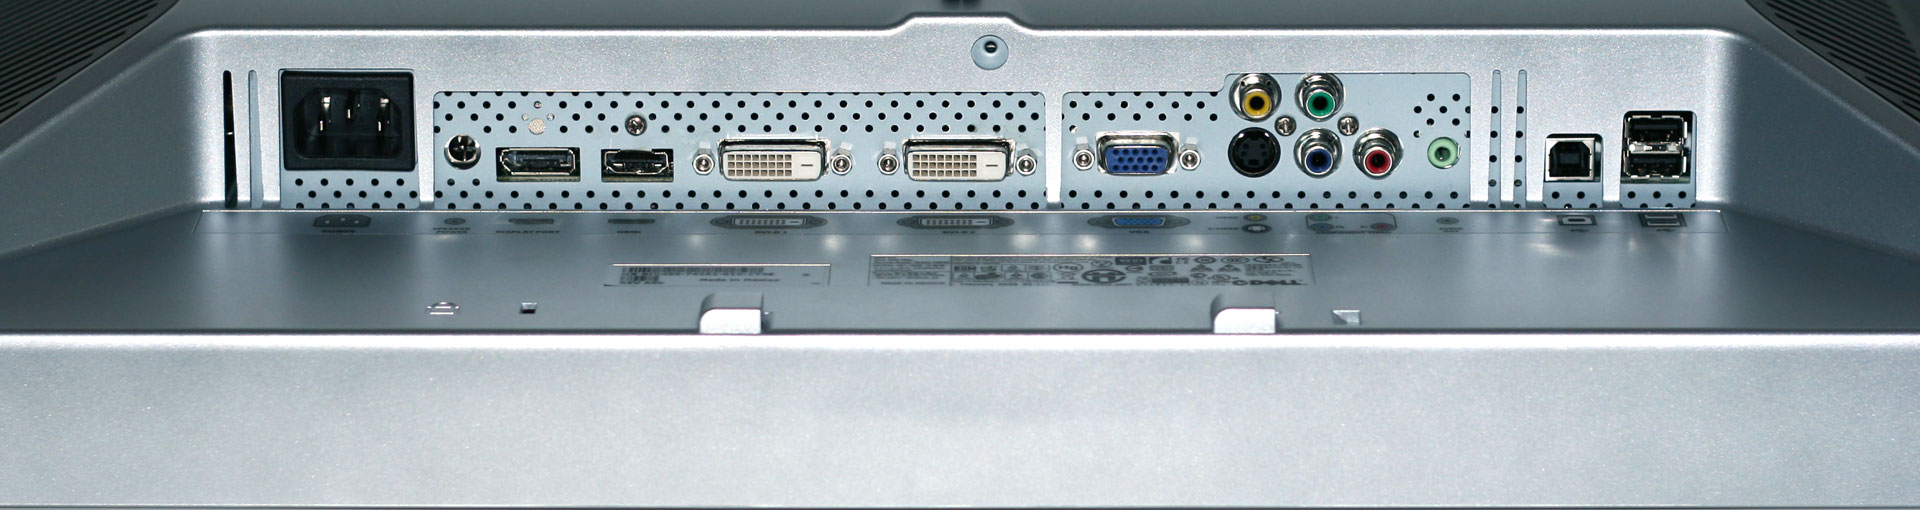 dell-2408wfp-view-back-ports.jpg